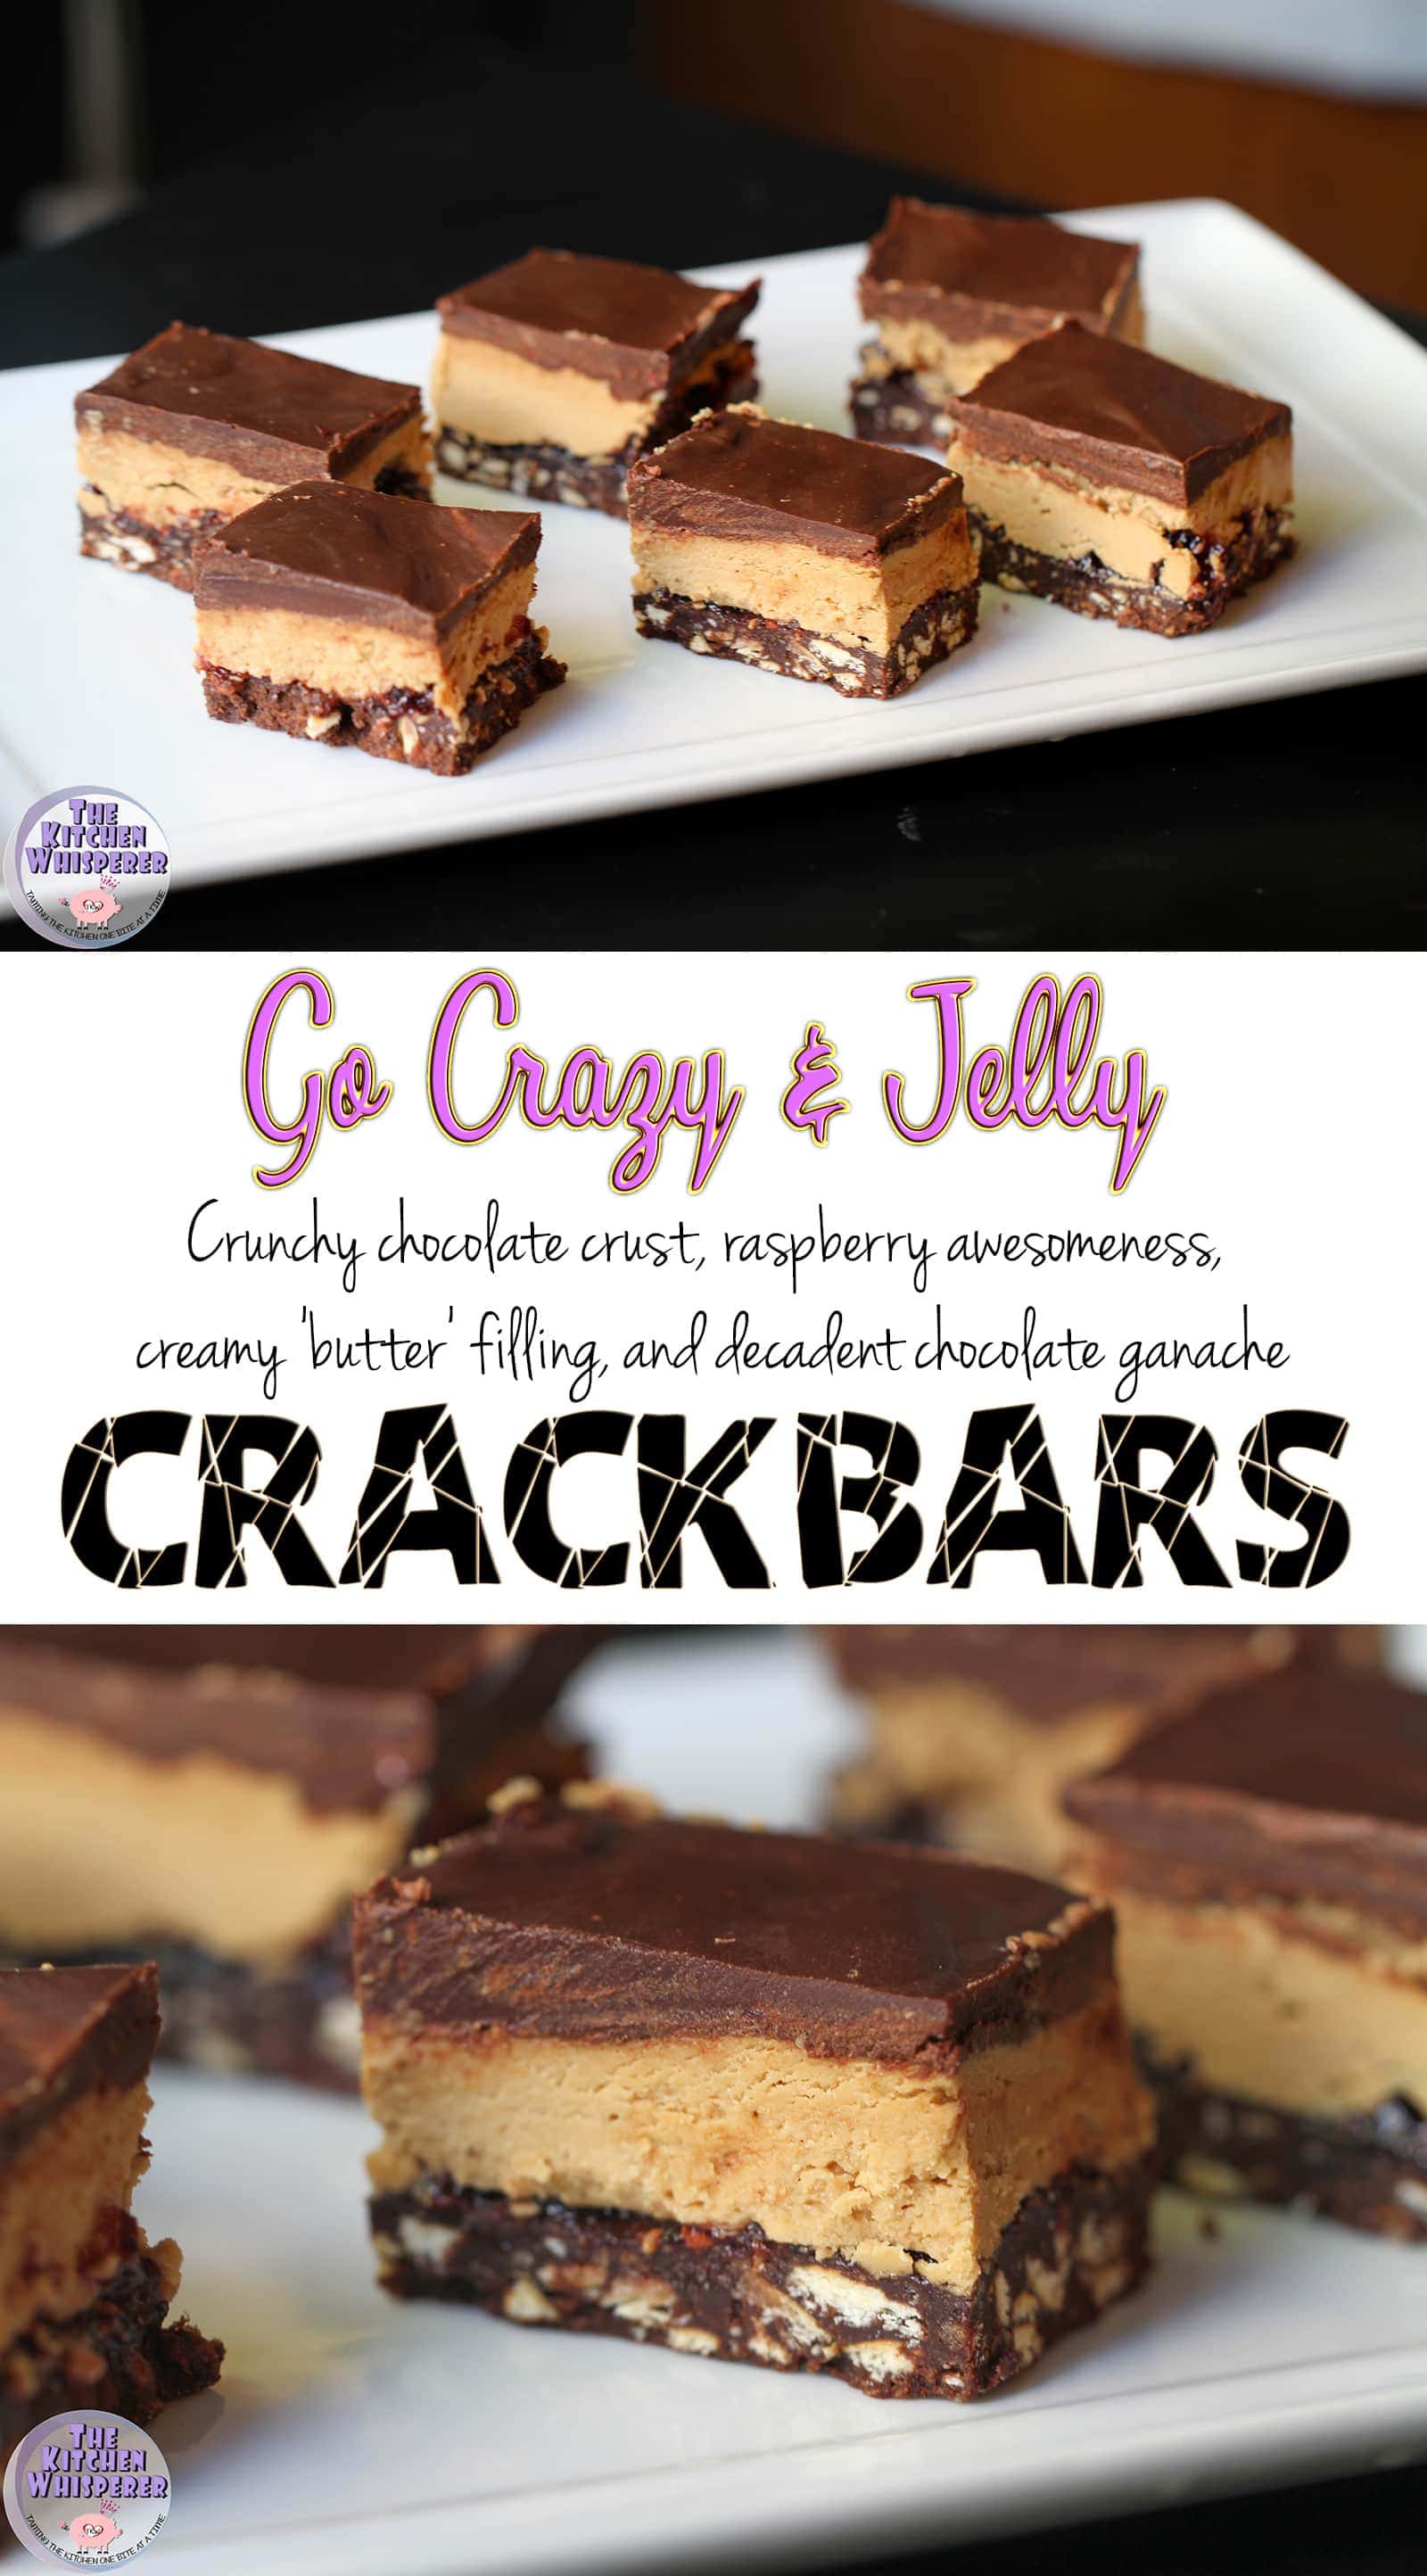 Go Crazy & Jelly Bars - Cookie Butter Peanut Butter & Jelly Crack bars